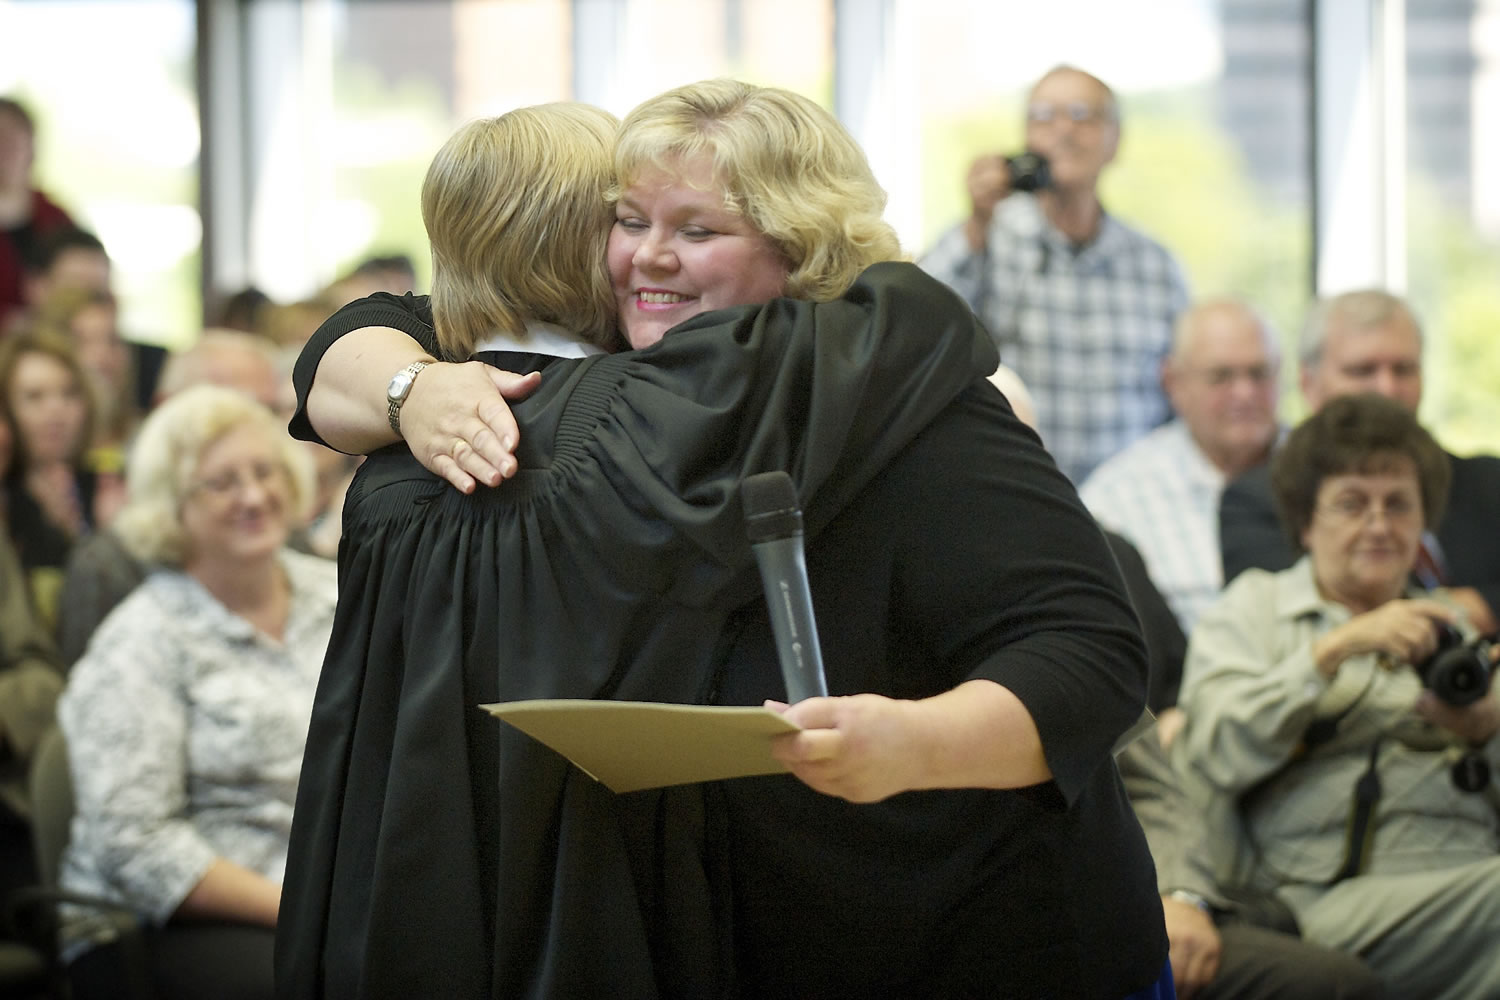 Suzan Clark, right, is embraced by Clark County Superior Court Judge Barbara Johnson after being sworn in as the county's newest Superior Court judge Friday at the Clark County Public Service Center.